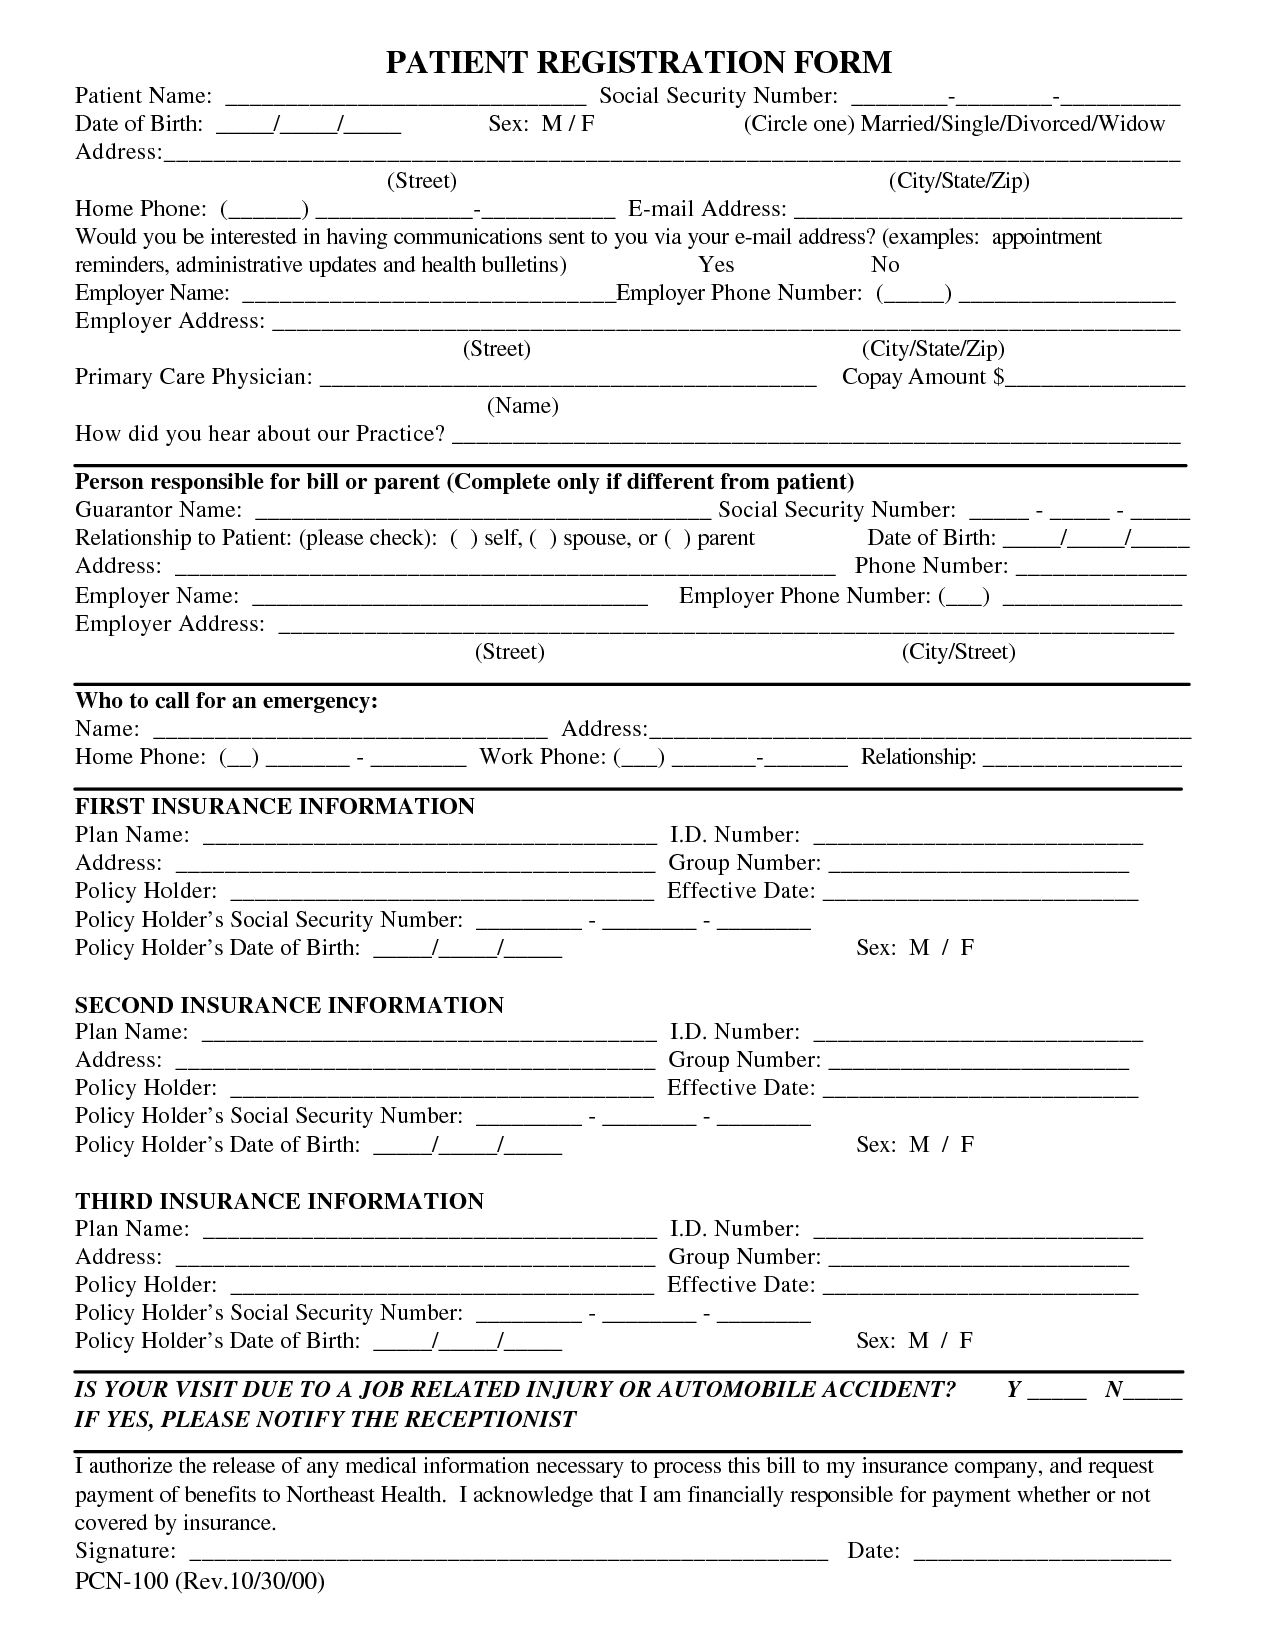 Free Patient Registration Form Template | Blank Medical Patient - Free Printable Medical Forms Kit